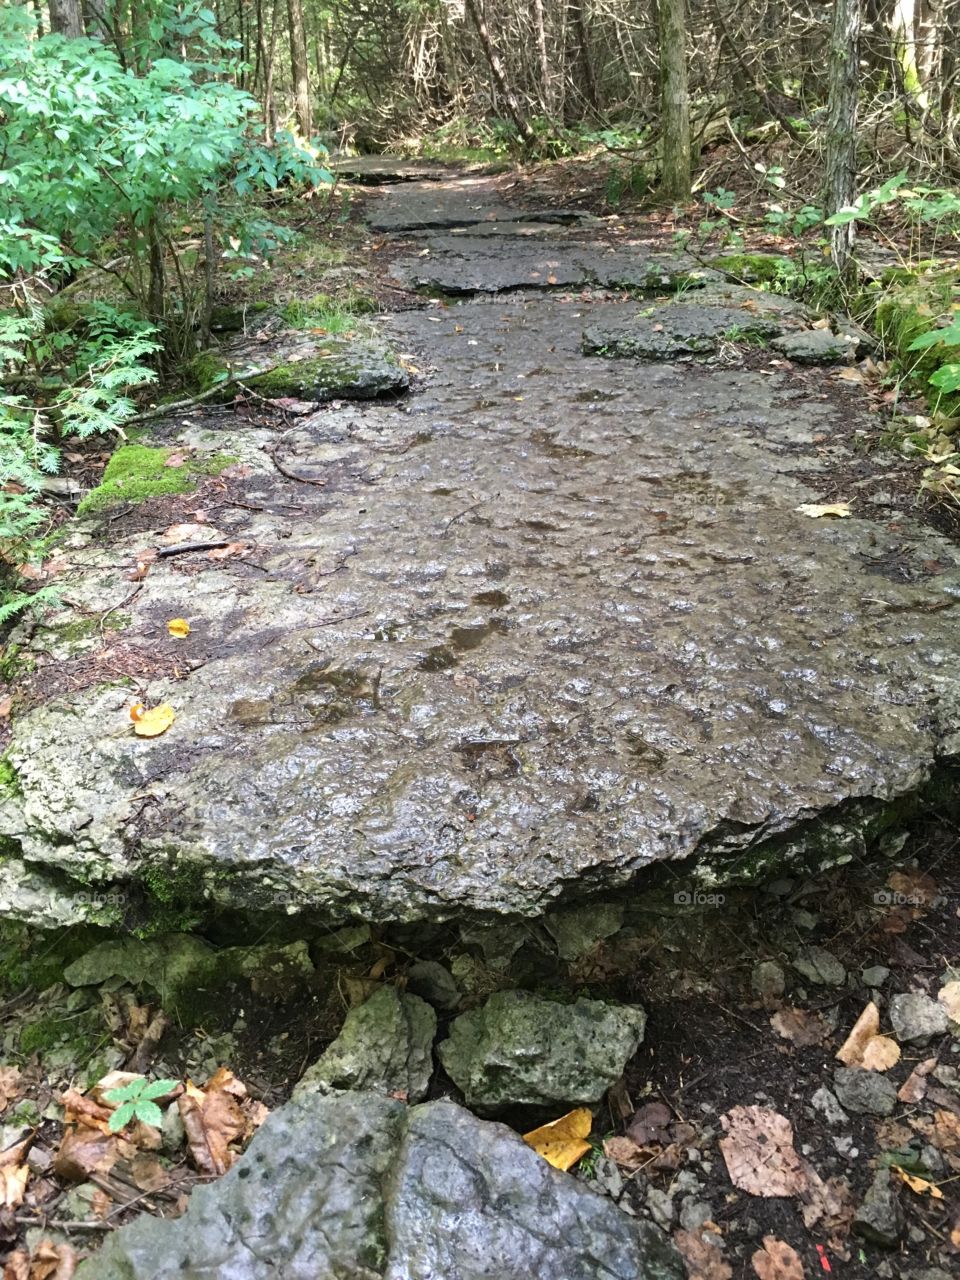 Walking a path of flat rock in the forest.